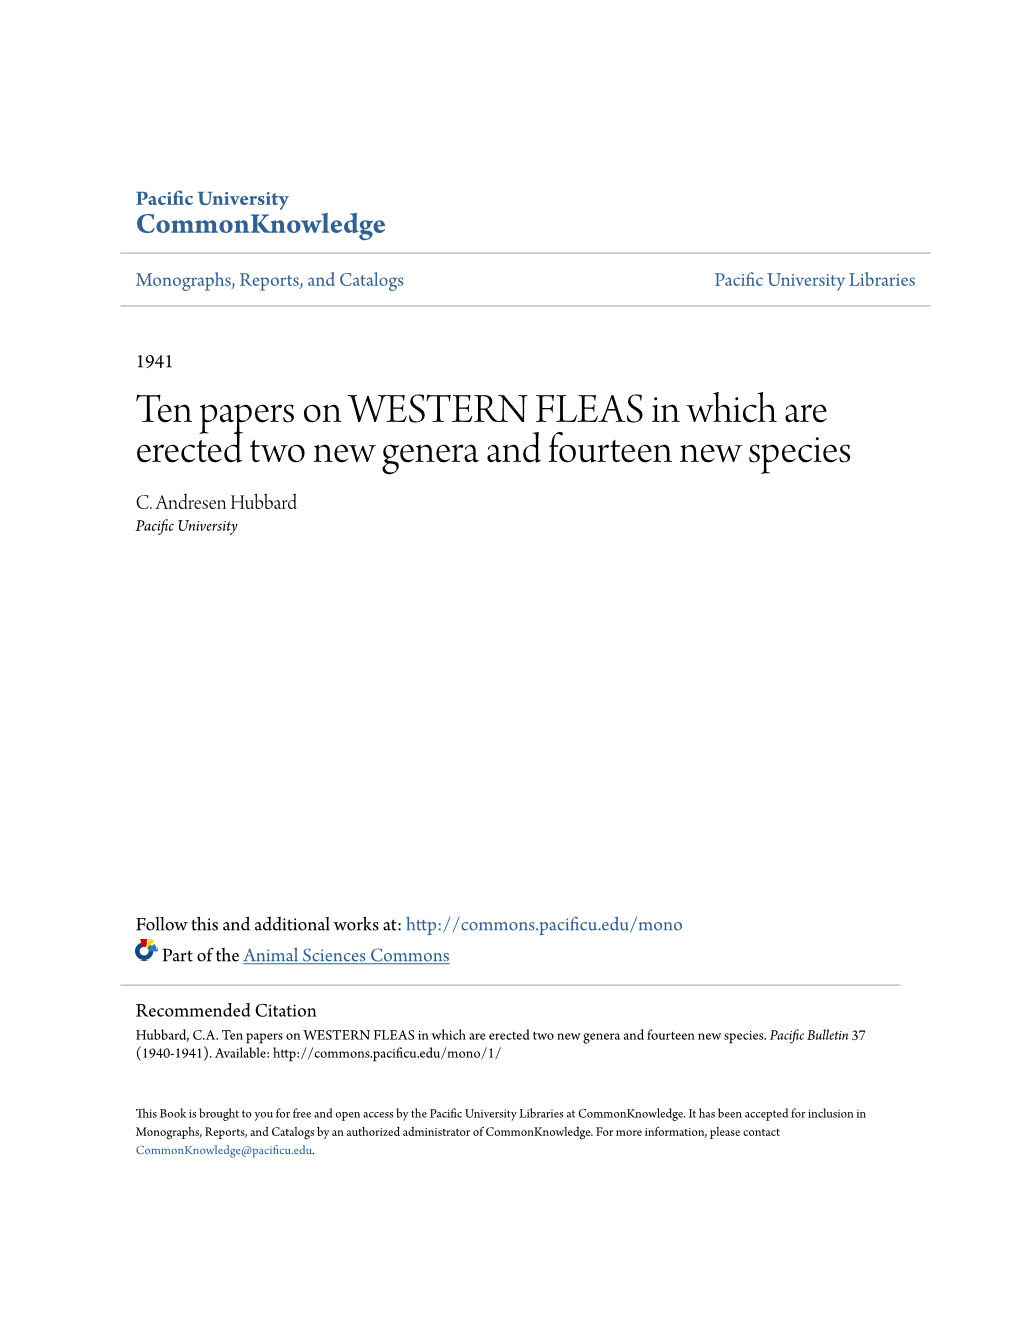 Ten Papers on WESTERN FLEAS in Which Are Erected Two New Genera and Fourteen New Species C